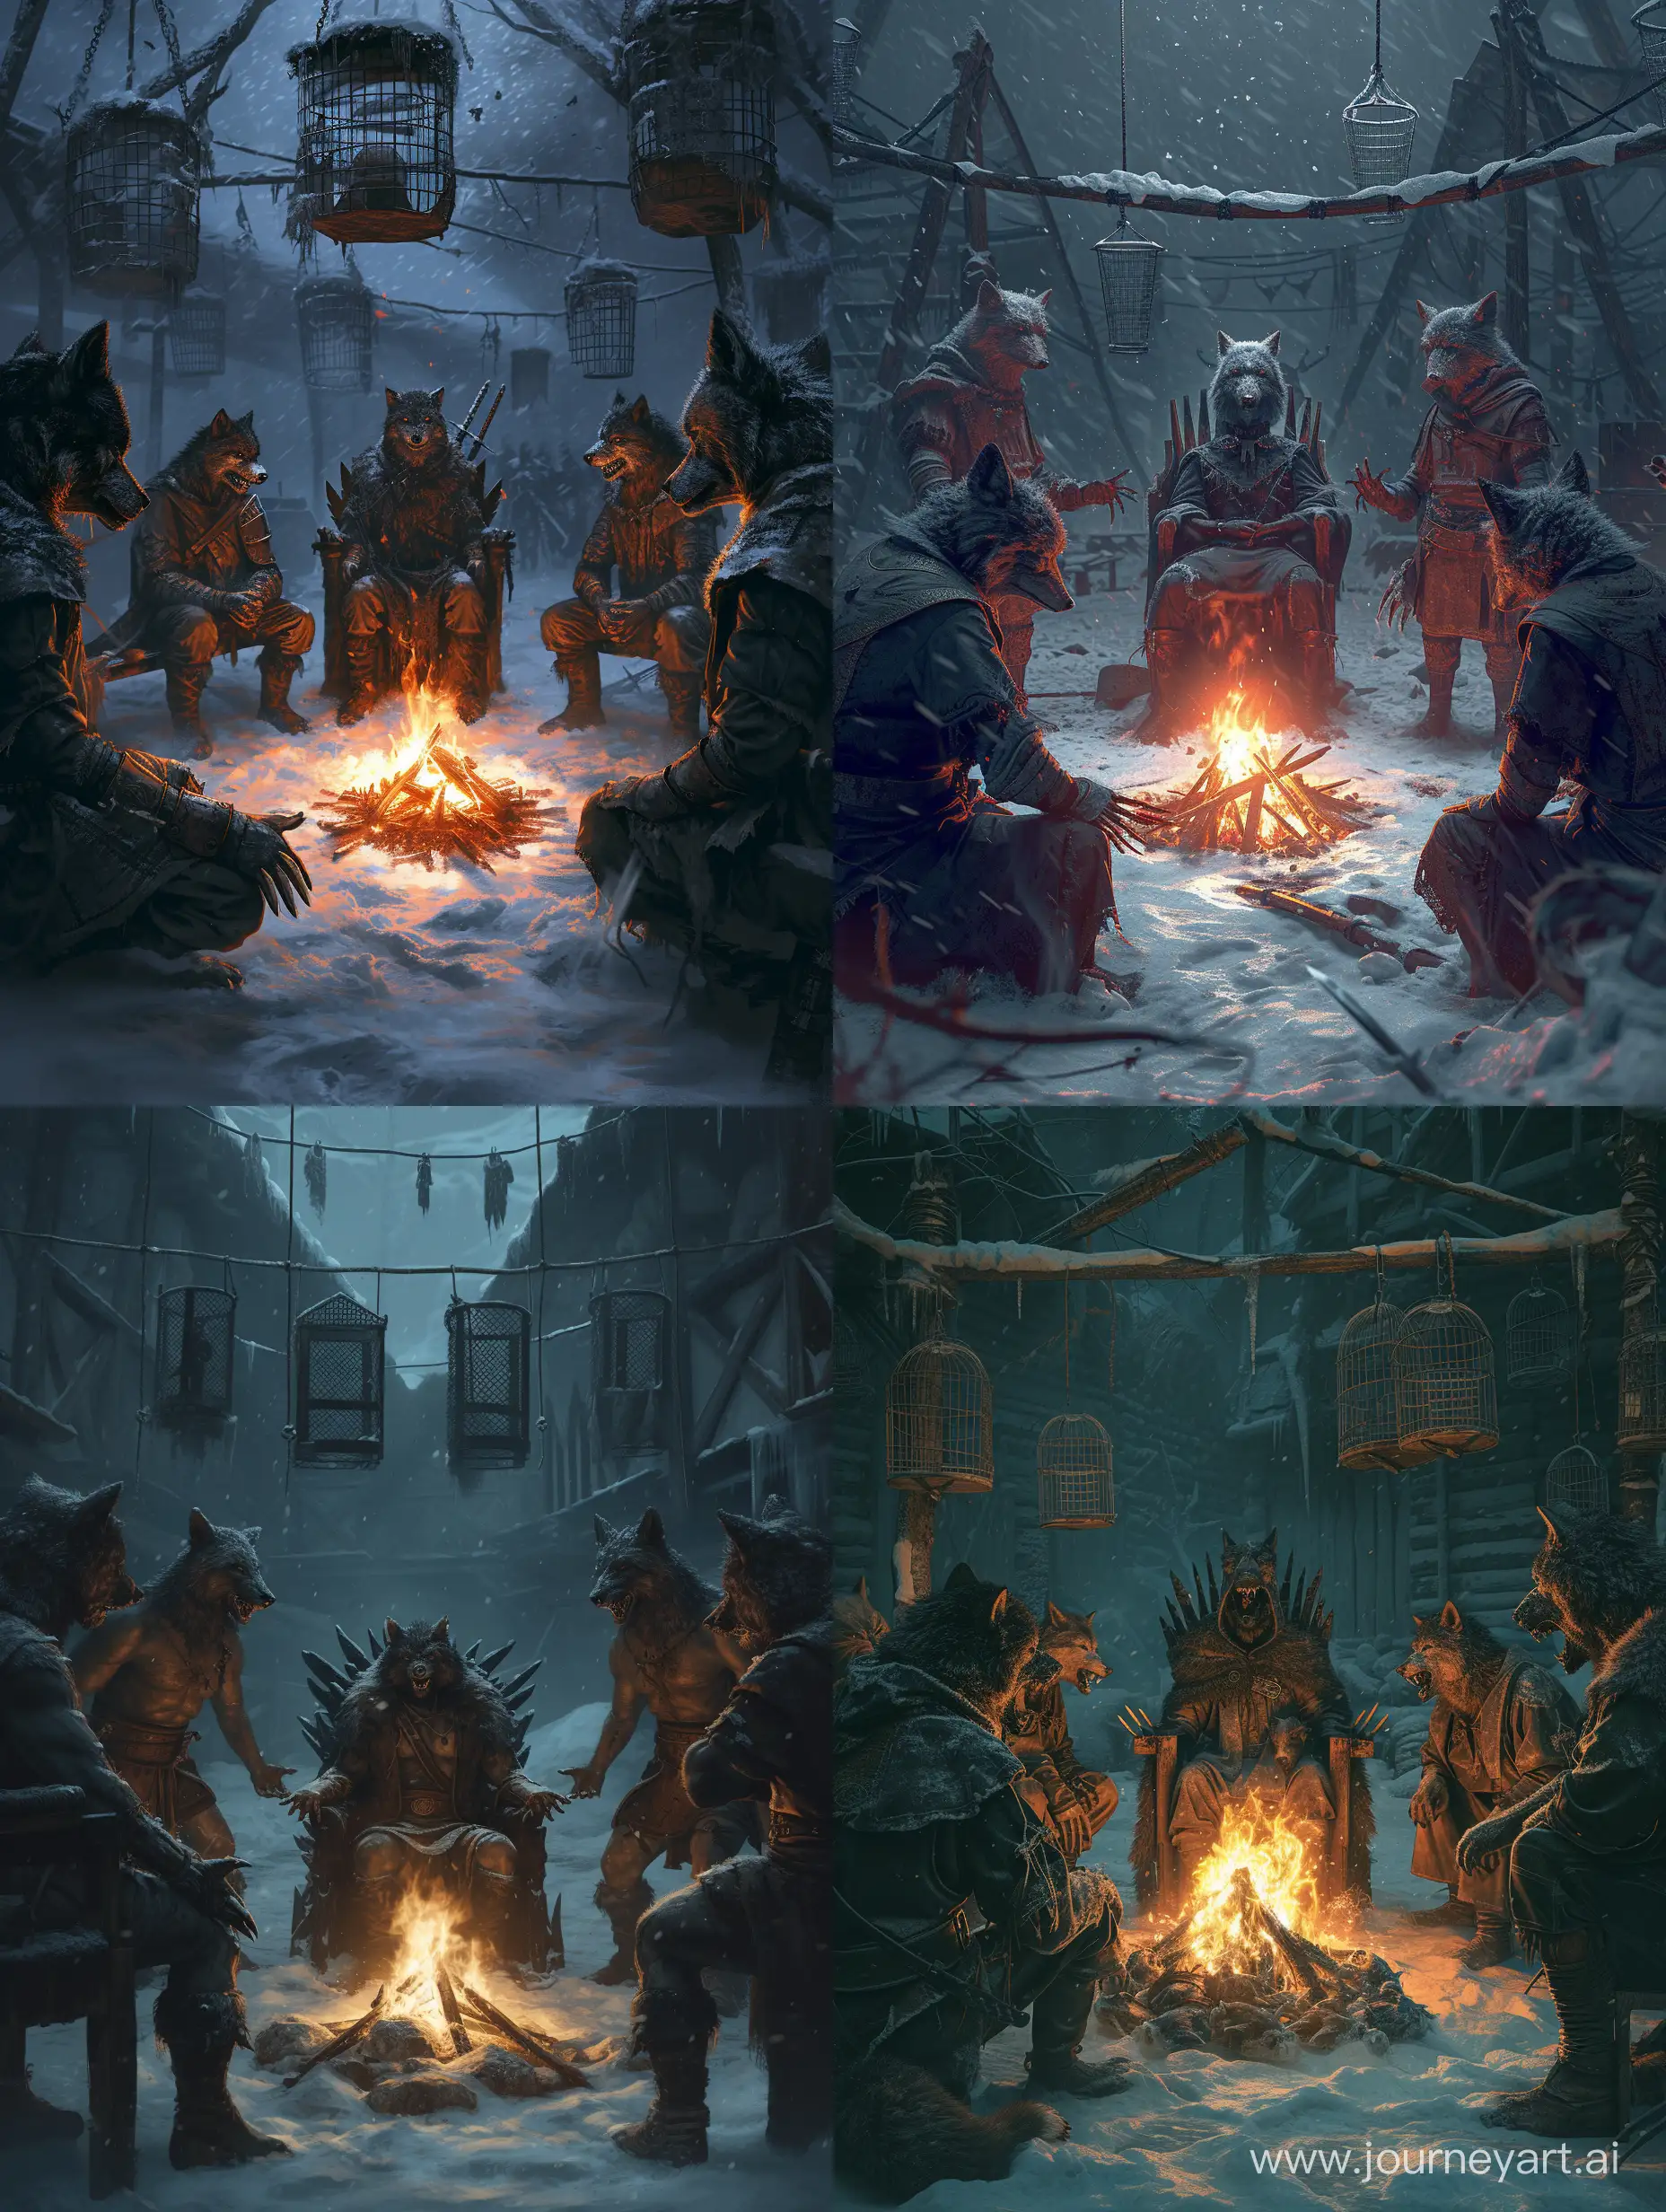 Ferocious-Wolf-Warriors-Circle-Around-the-Fire-in-a-Snowy-Horror-Camp